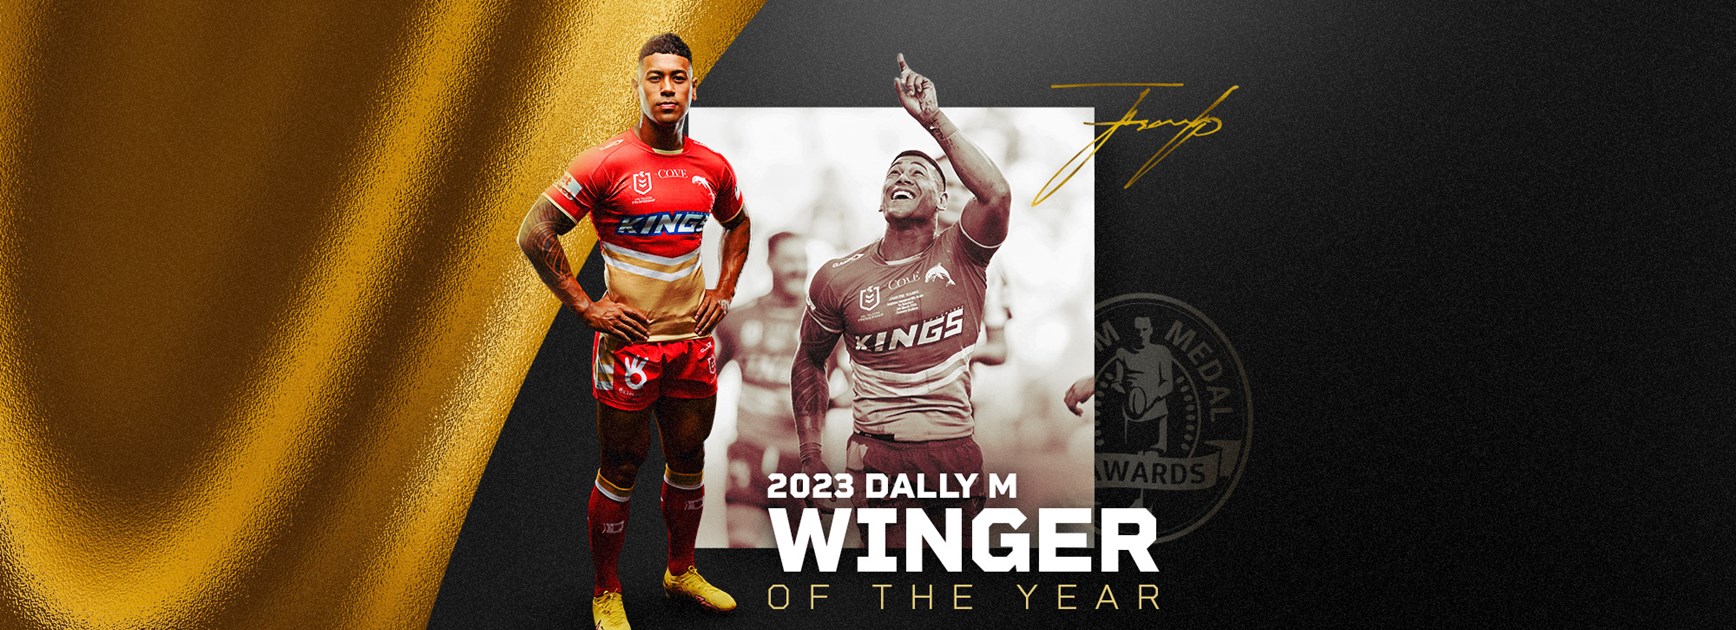 Isaako wins Dally M Winger of the Year